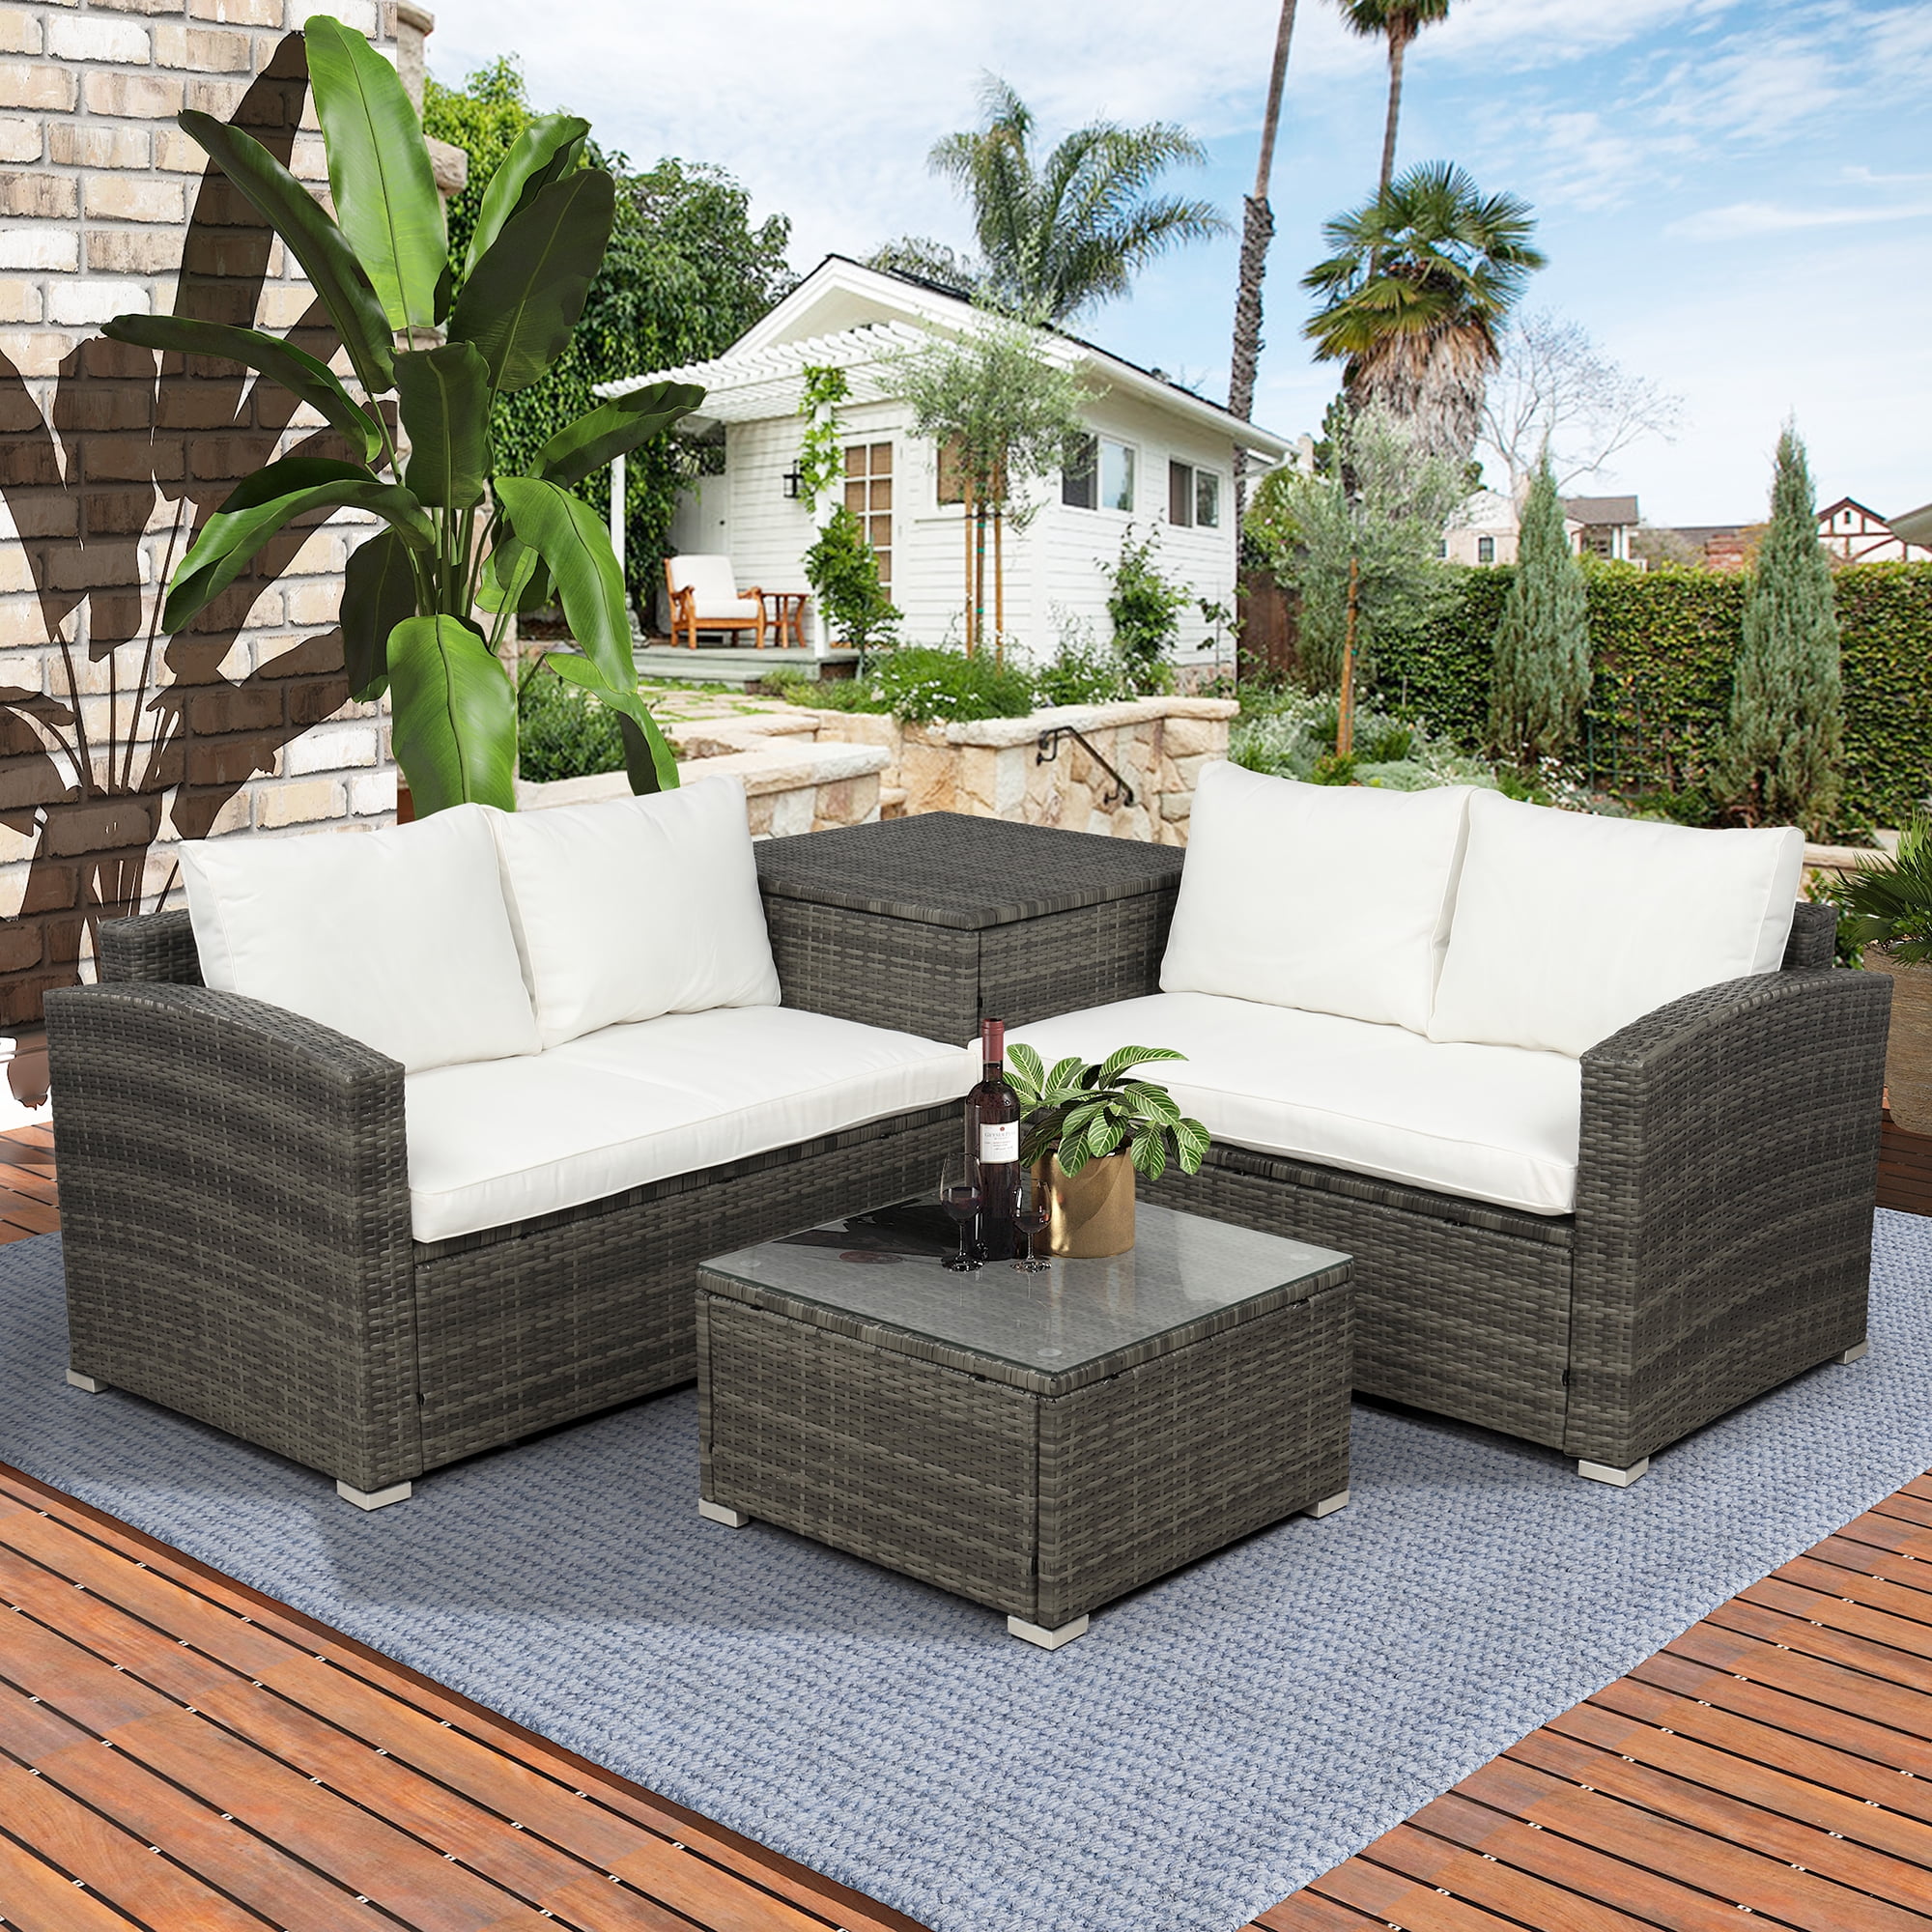 Black Bistro Sets with Coffee Table for Courtyard Balcony Garden Wicker Chairs with Soft Cushion and Table with Tempered Glass Outdoor Rattan Sofas with Tempered Glass Coffee Table DORTALA 4-Piece Patio Wicker Conversation Furniture Set